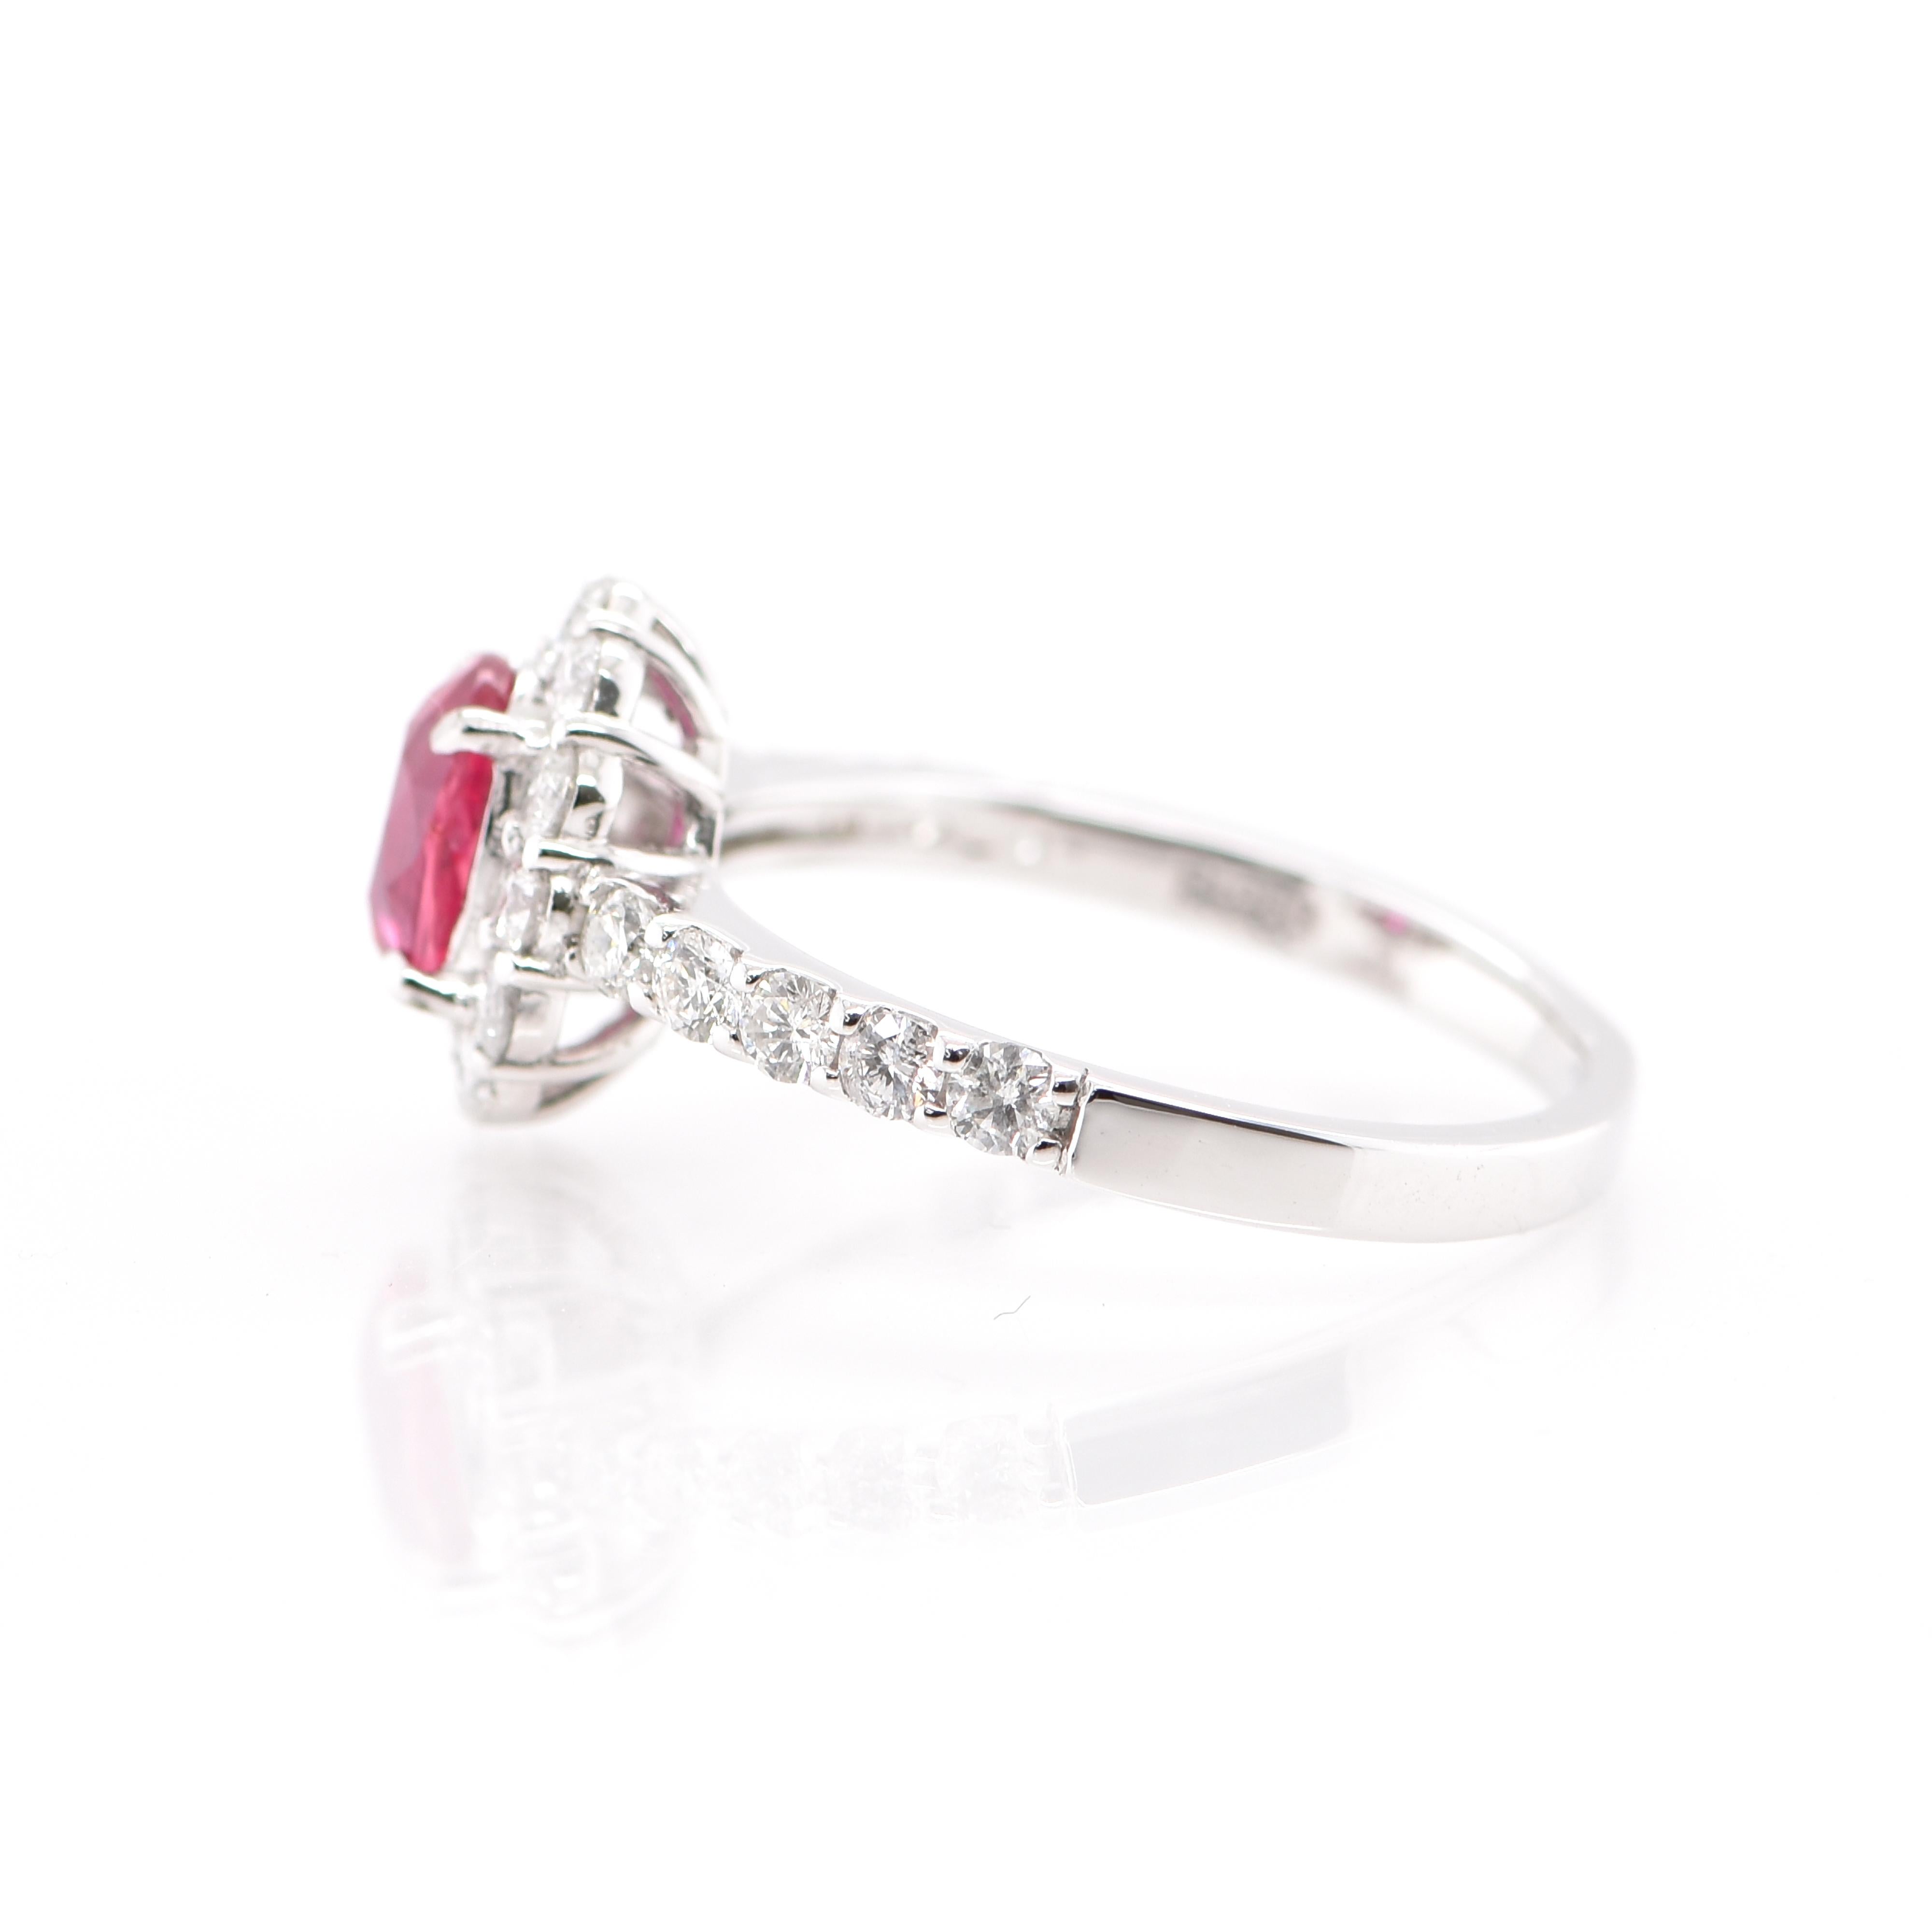 Oval Cut 1.07 Carat Natural Untreated 'No Heat' Ruby and Diamond Ring Set in Platinum